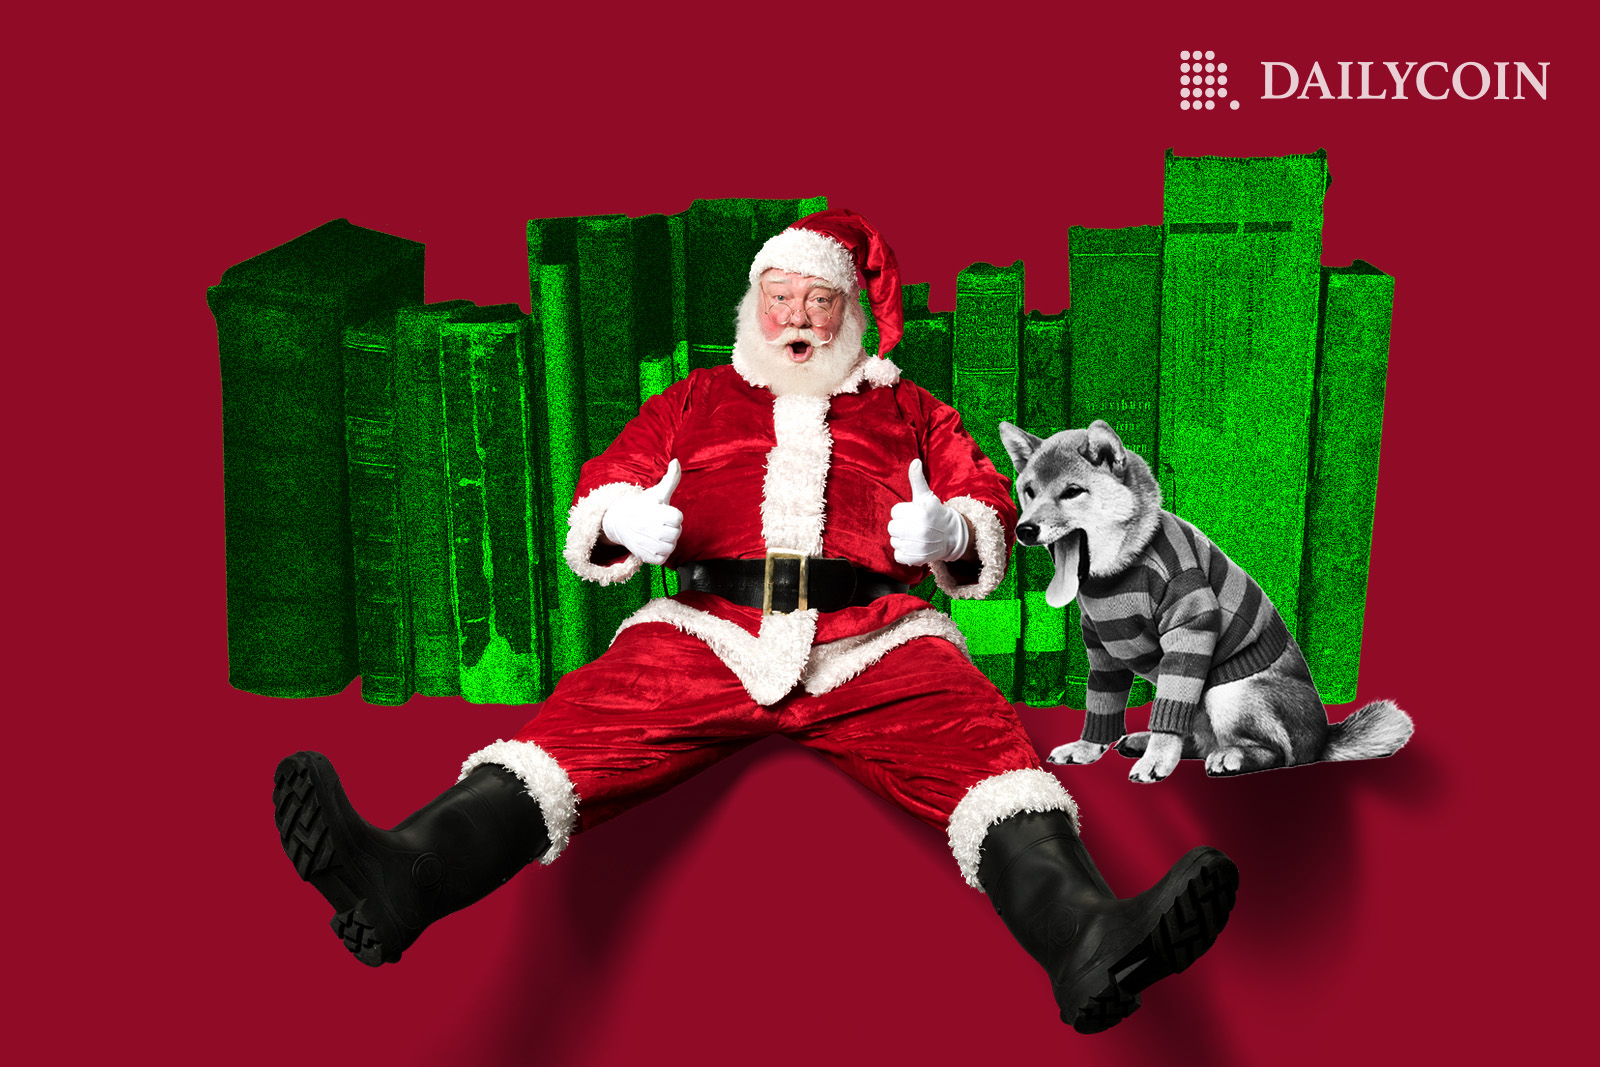 Santa next to a Shiba Inu wearing a strapped T-Shirt in front of green books